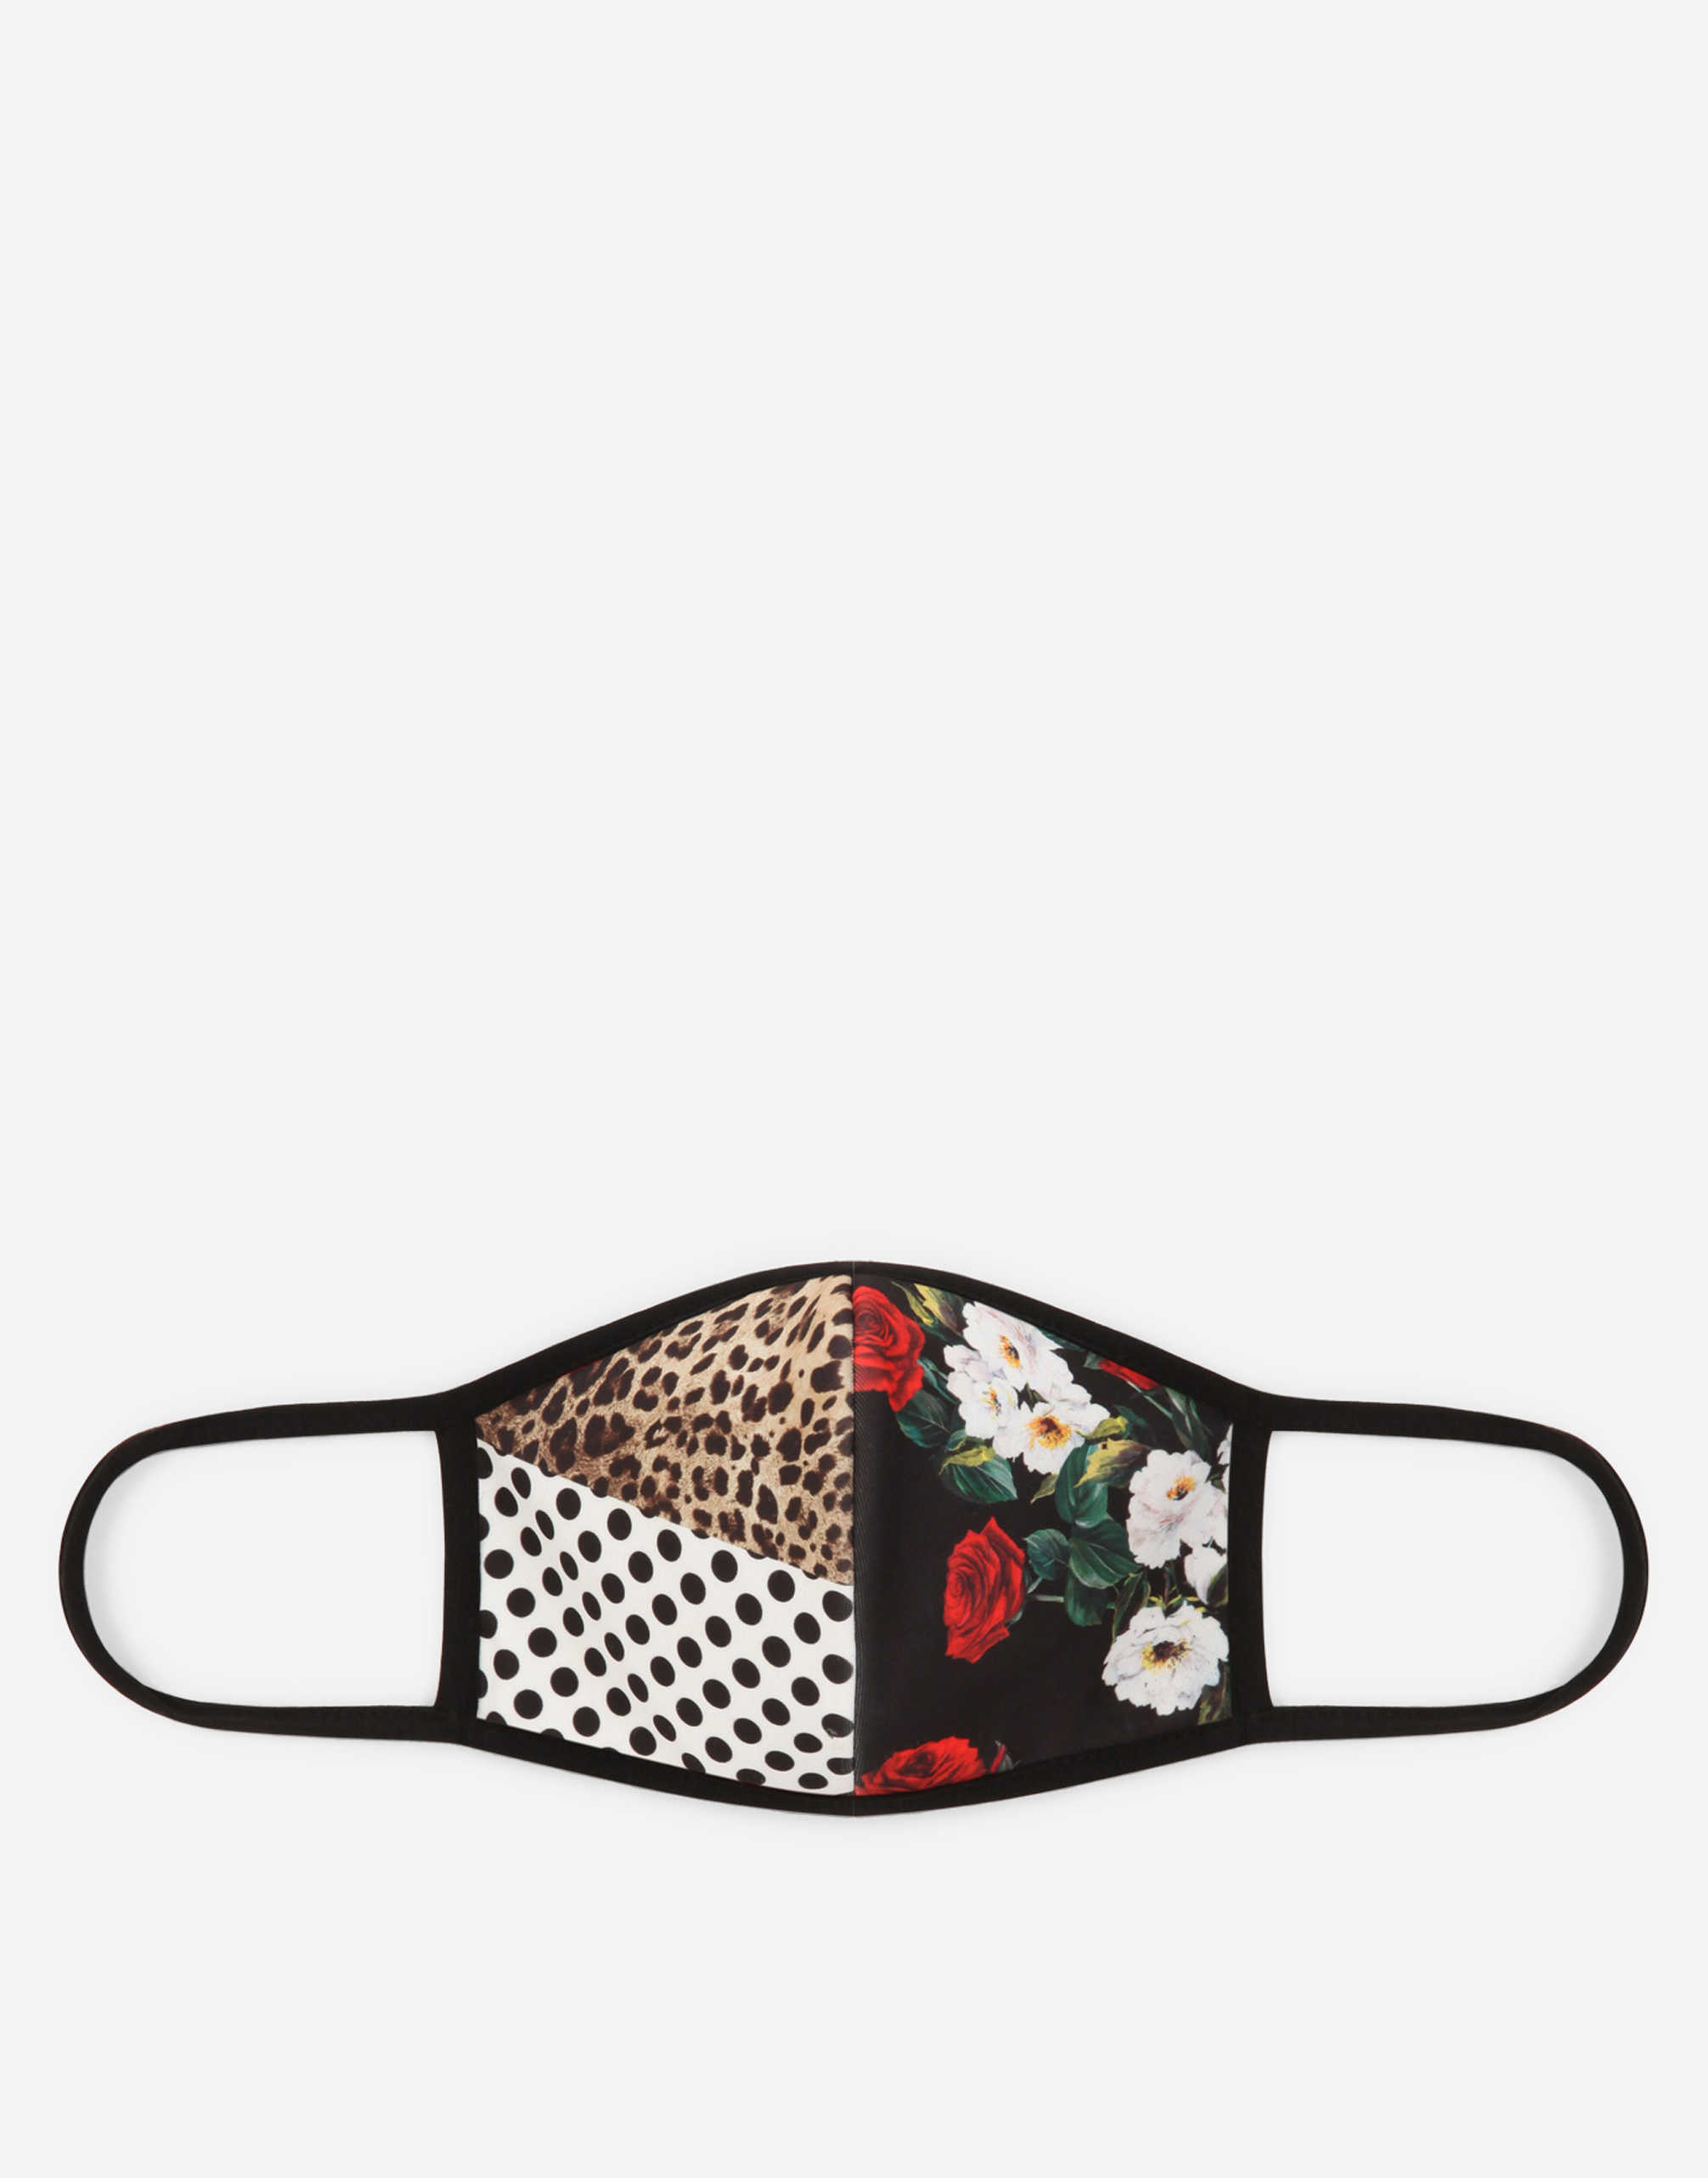 Patchwork face mask in Multicolor